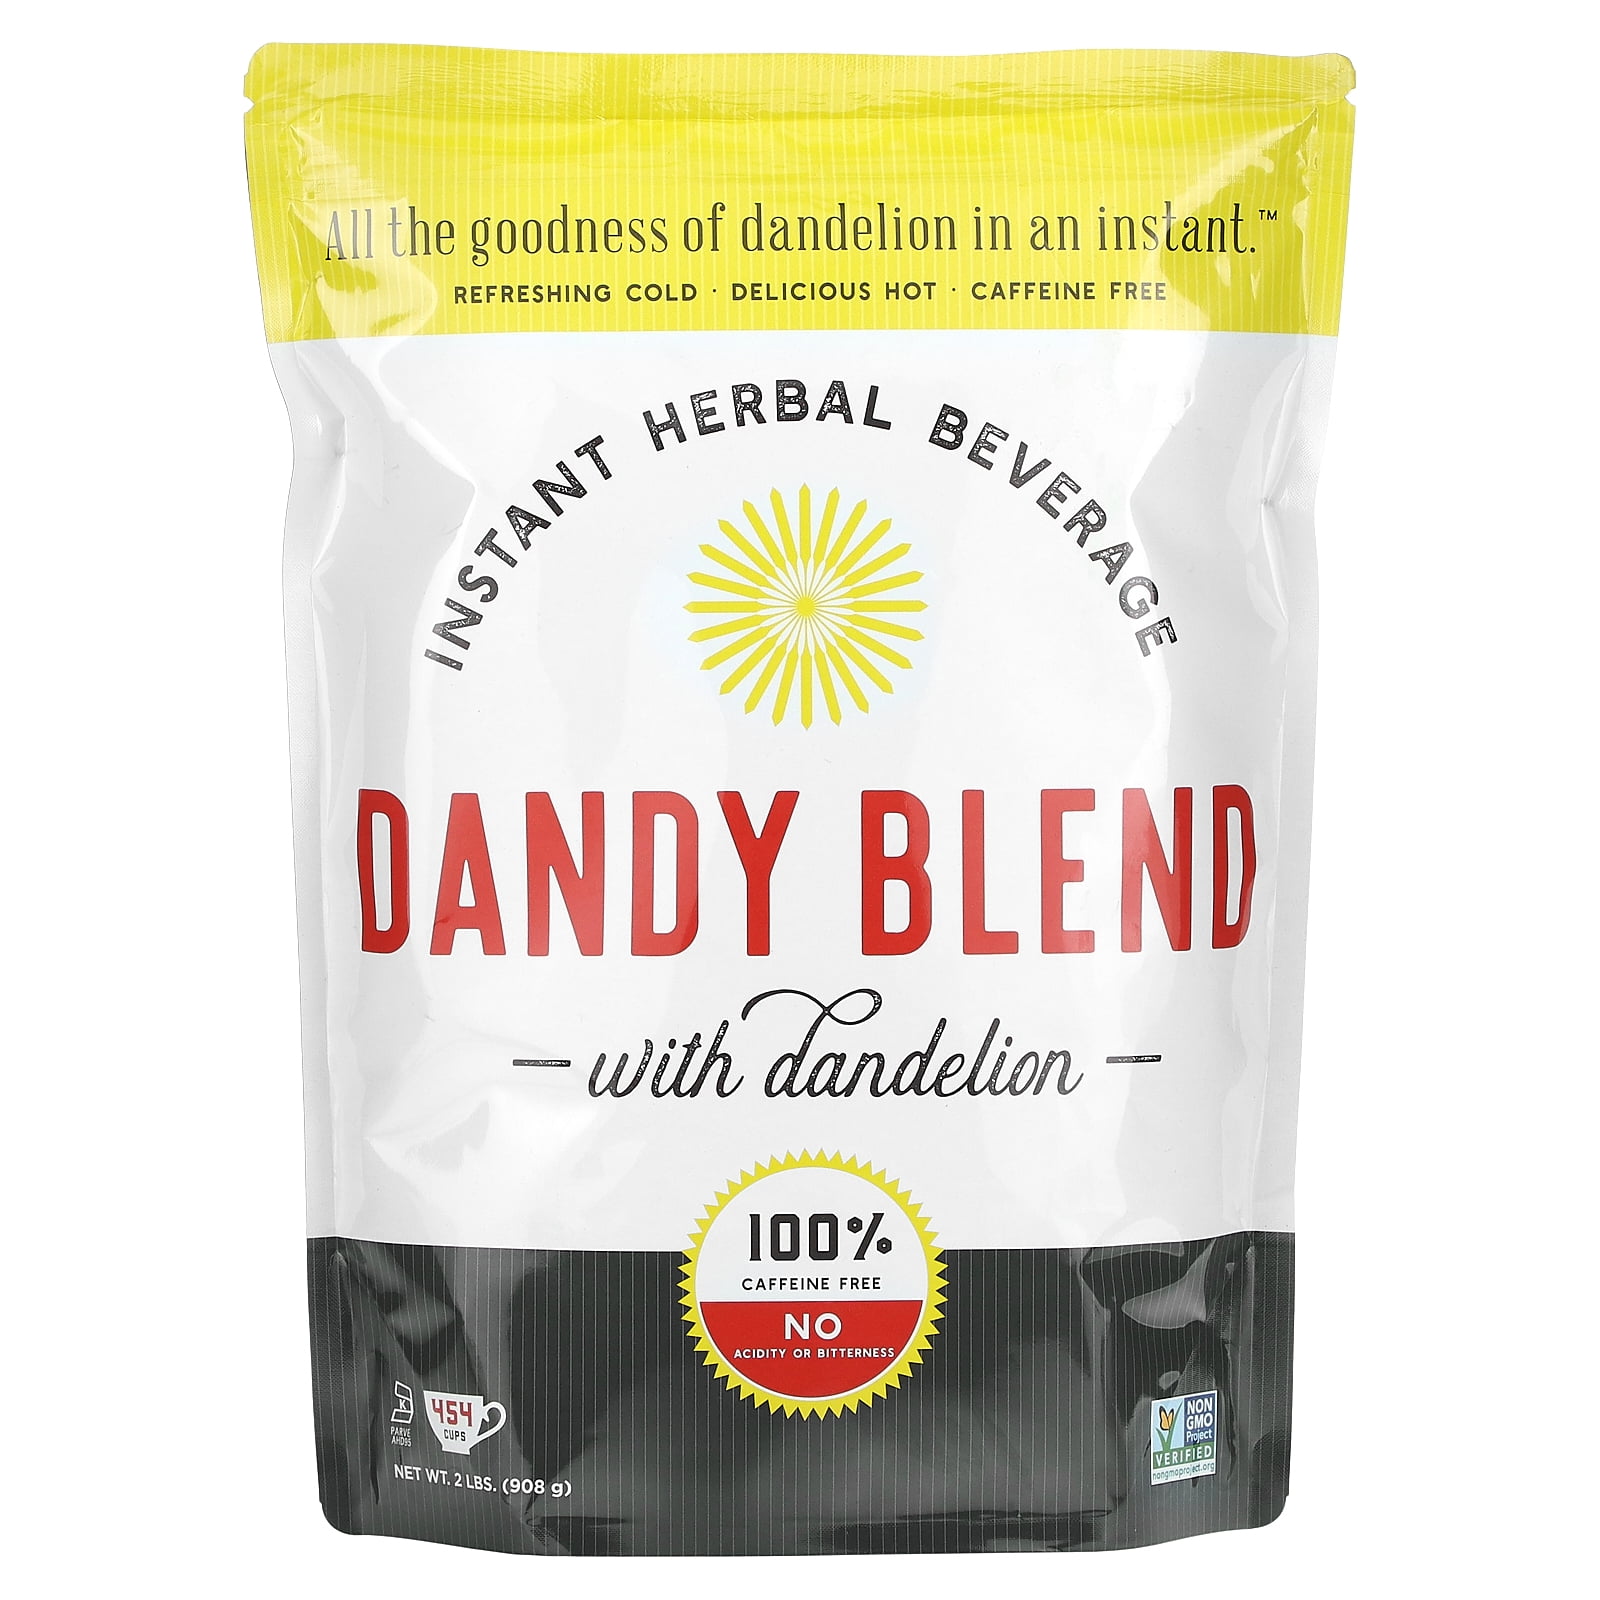 Dandy Blend Review & Giveaway!